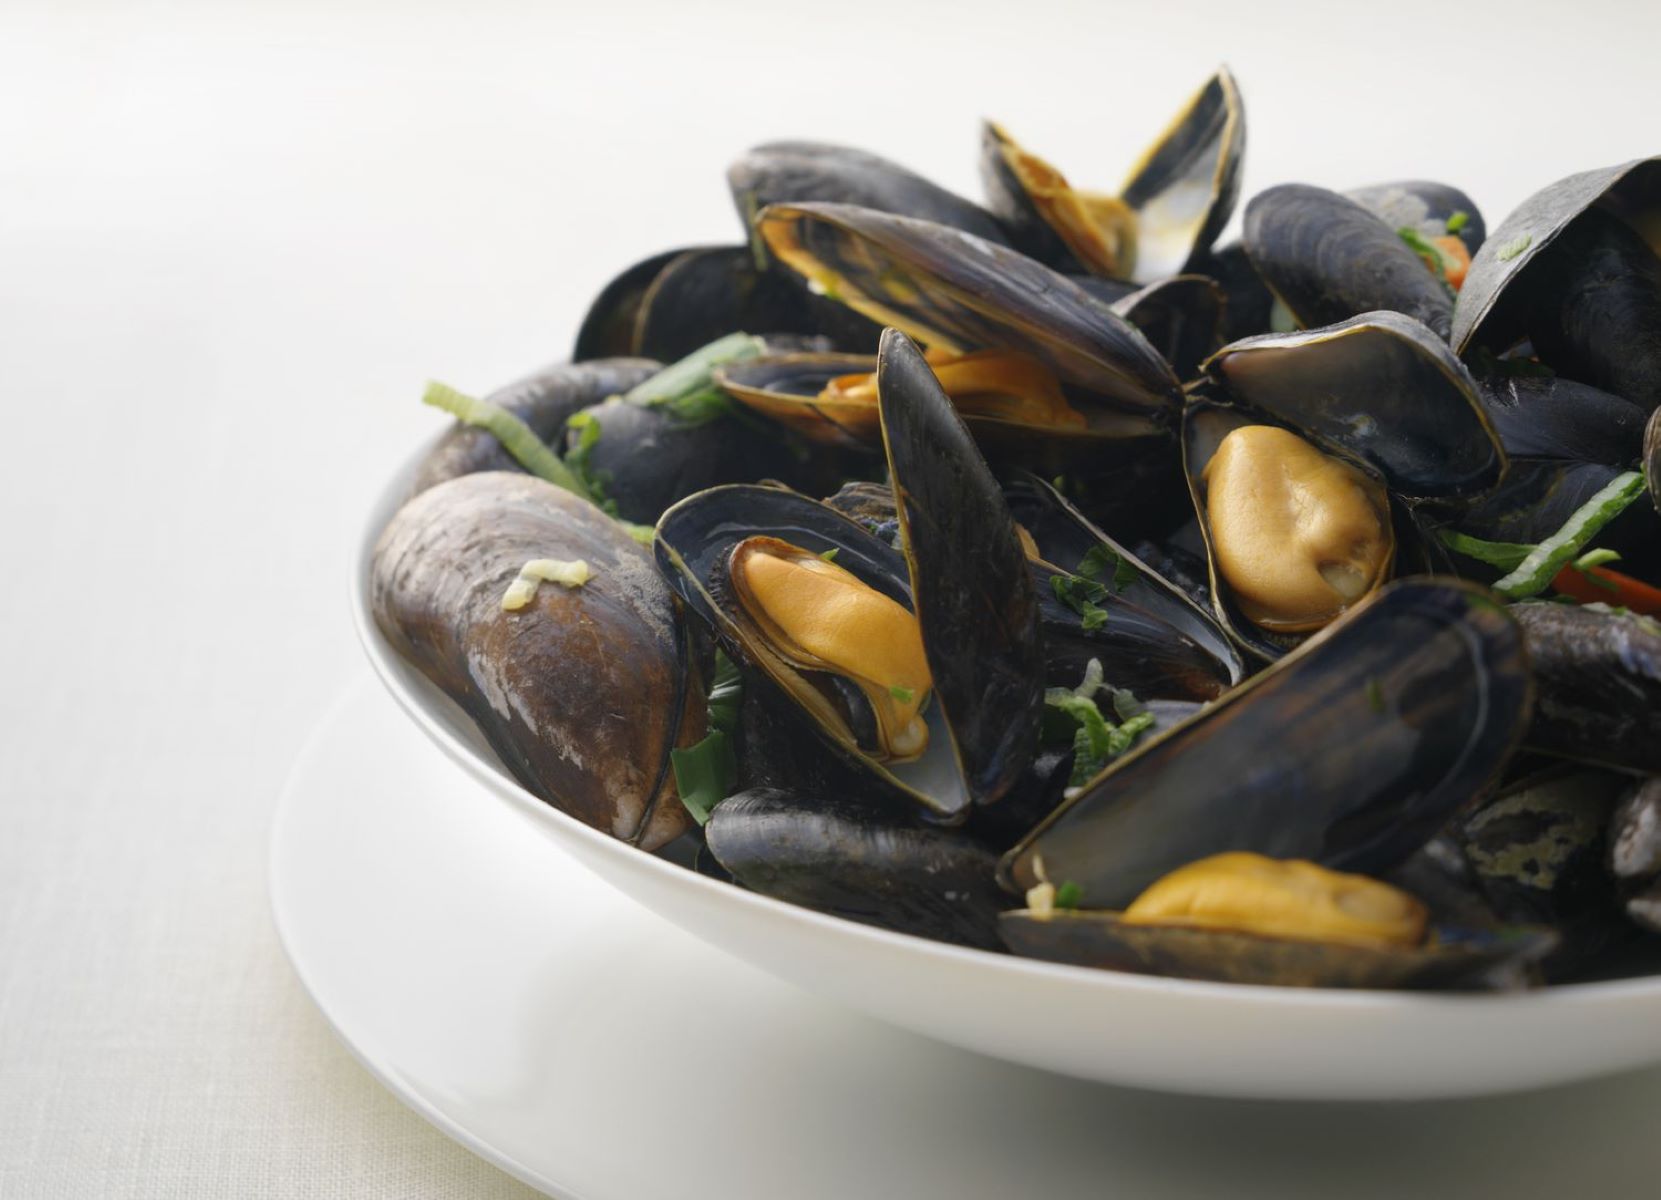 The Ultimate Showdown: Black Mussels Vs. New Zealand Mussels – Which Reigns Supreme In Taste And Texture?